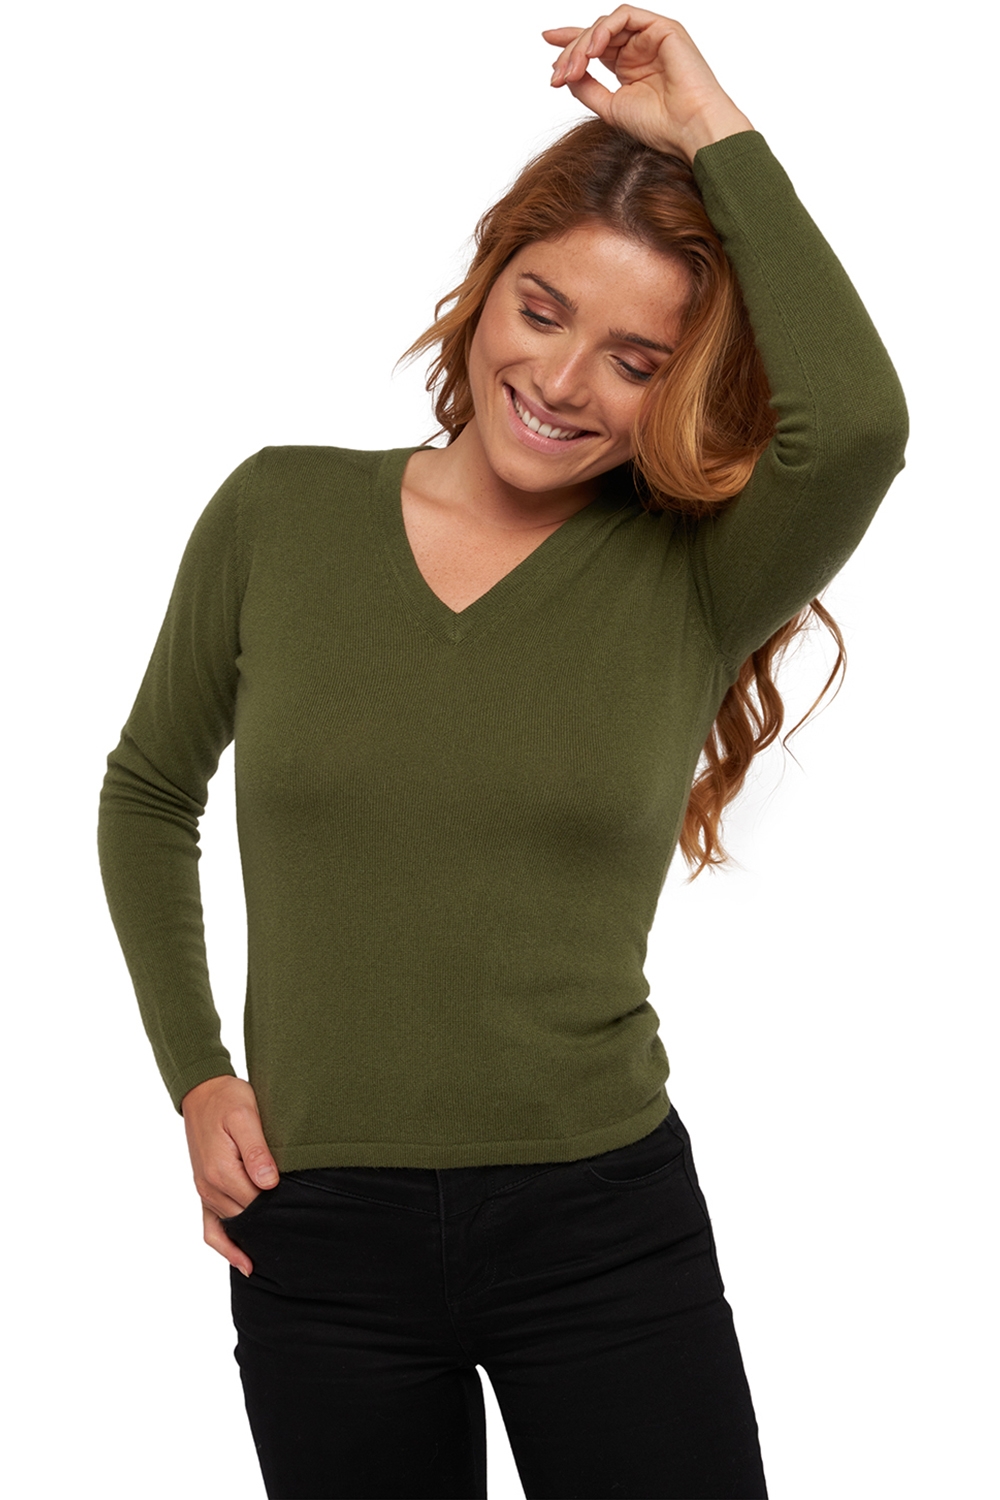 Cashmere ladies timeless classics emma ivy green s